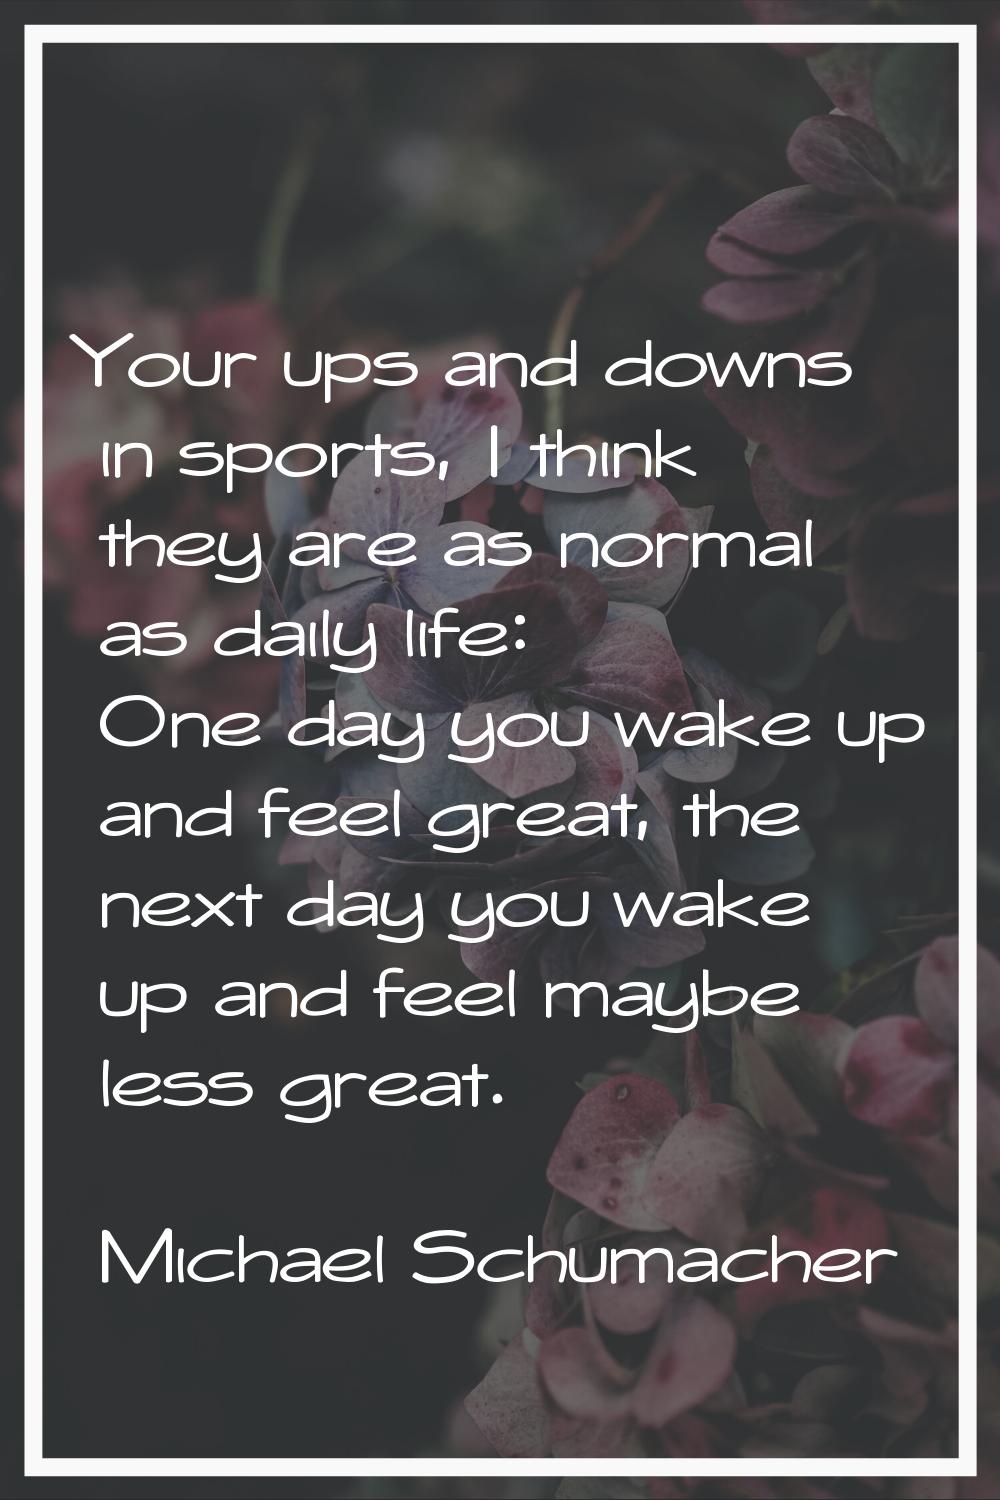 Your ups and downs in sports, I think they are as normal as daily life: One day you wake up and fee